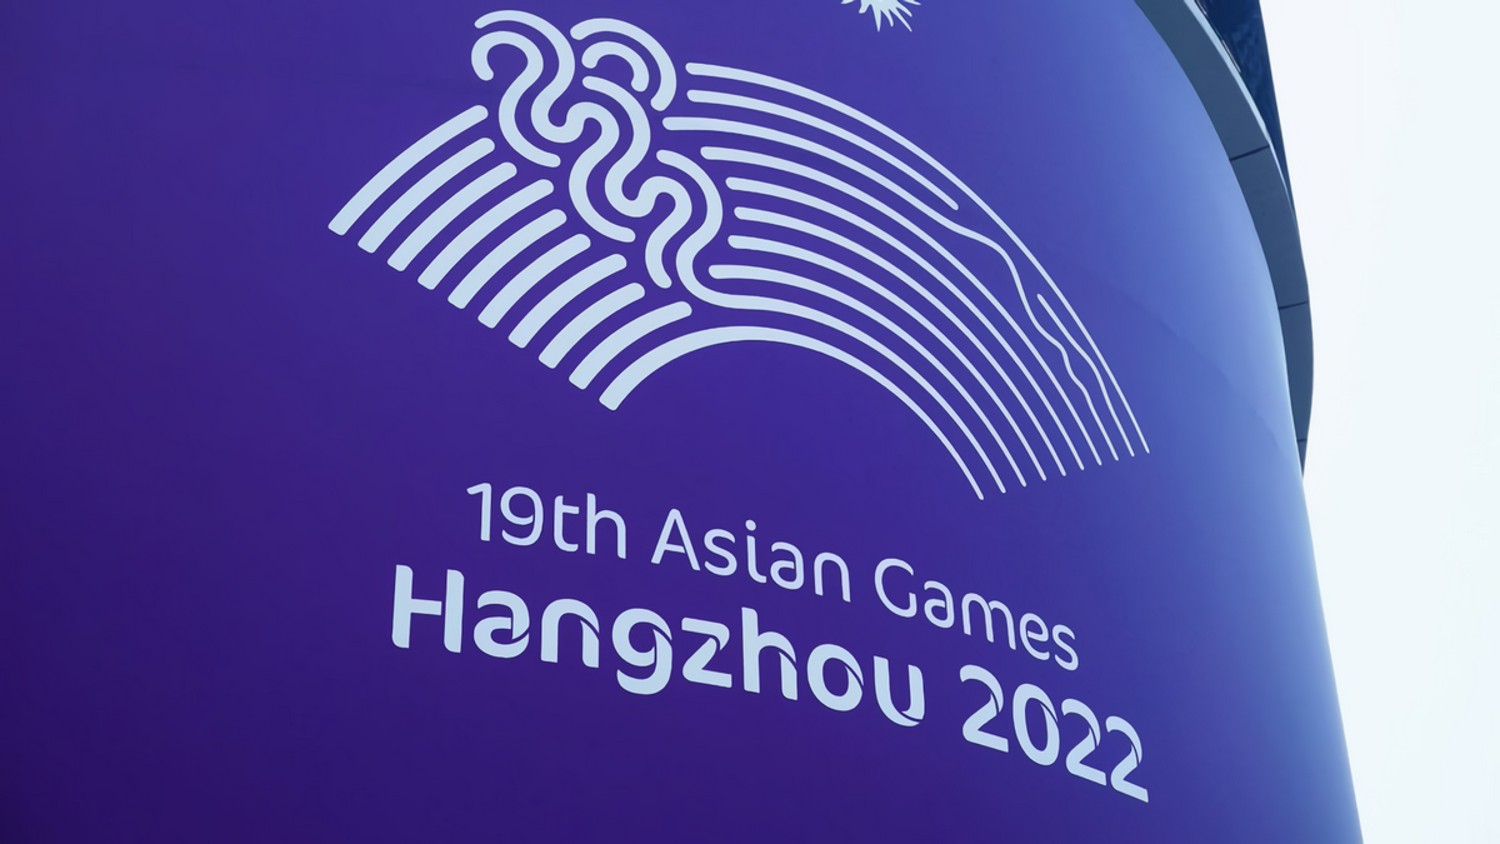 All you need to know about 2023 Asian Games Dates, Venue, Schedule